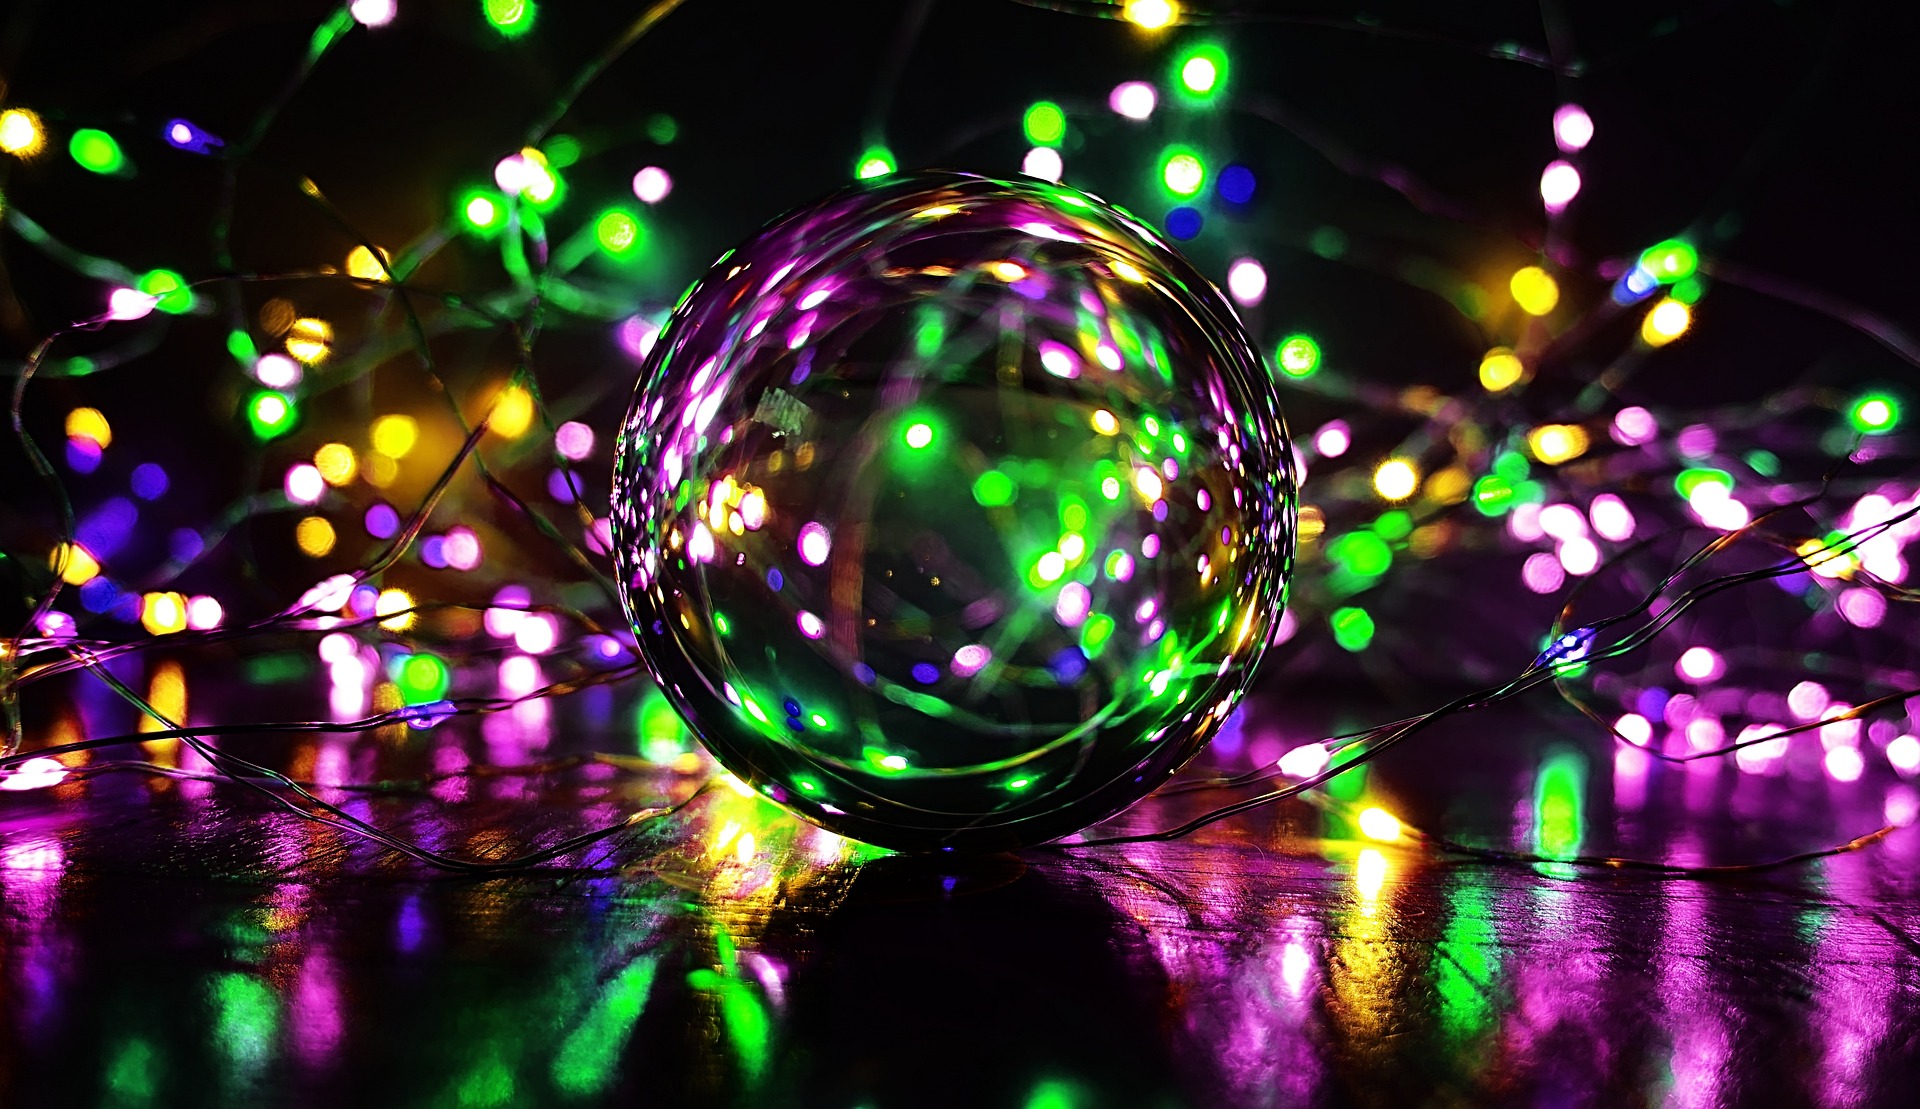 A colorful crystal ball